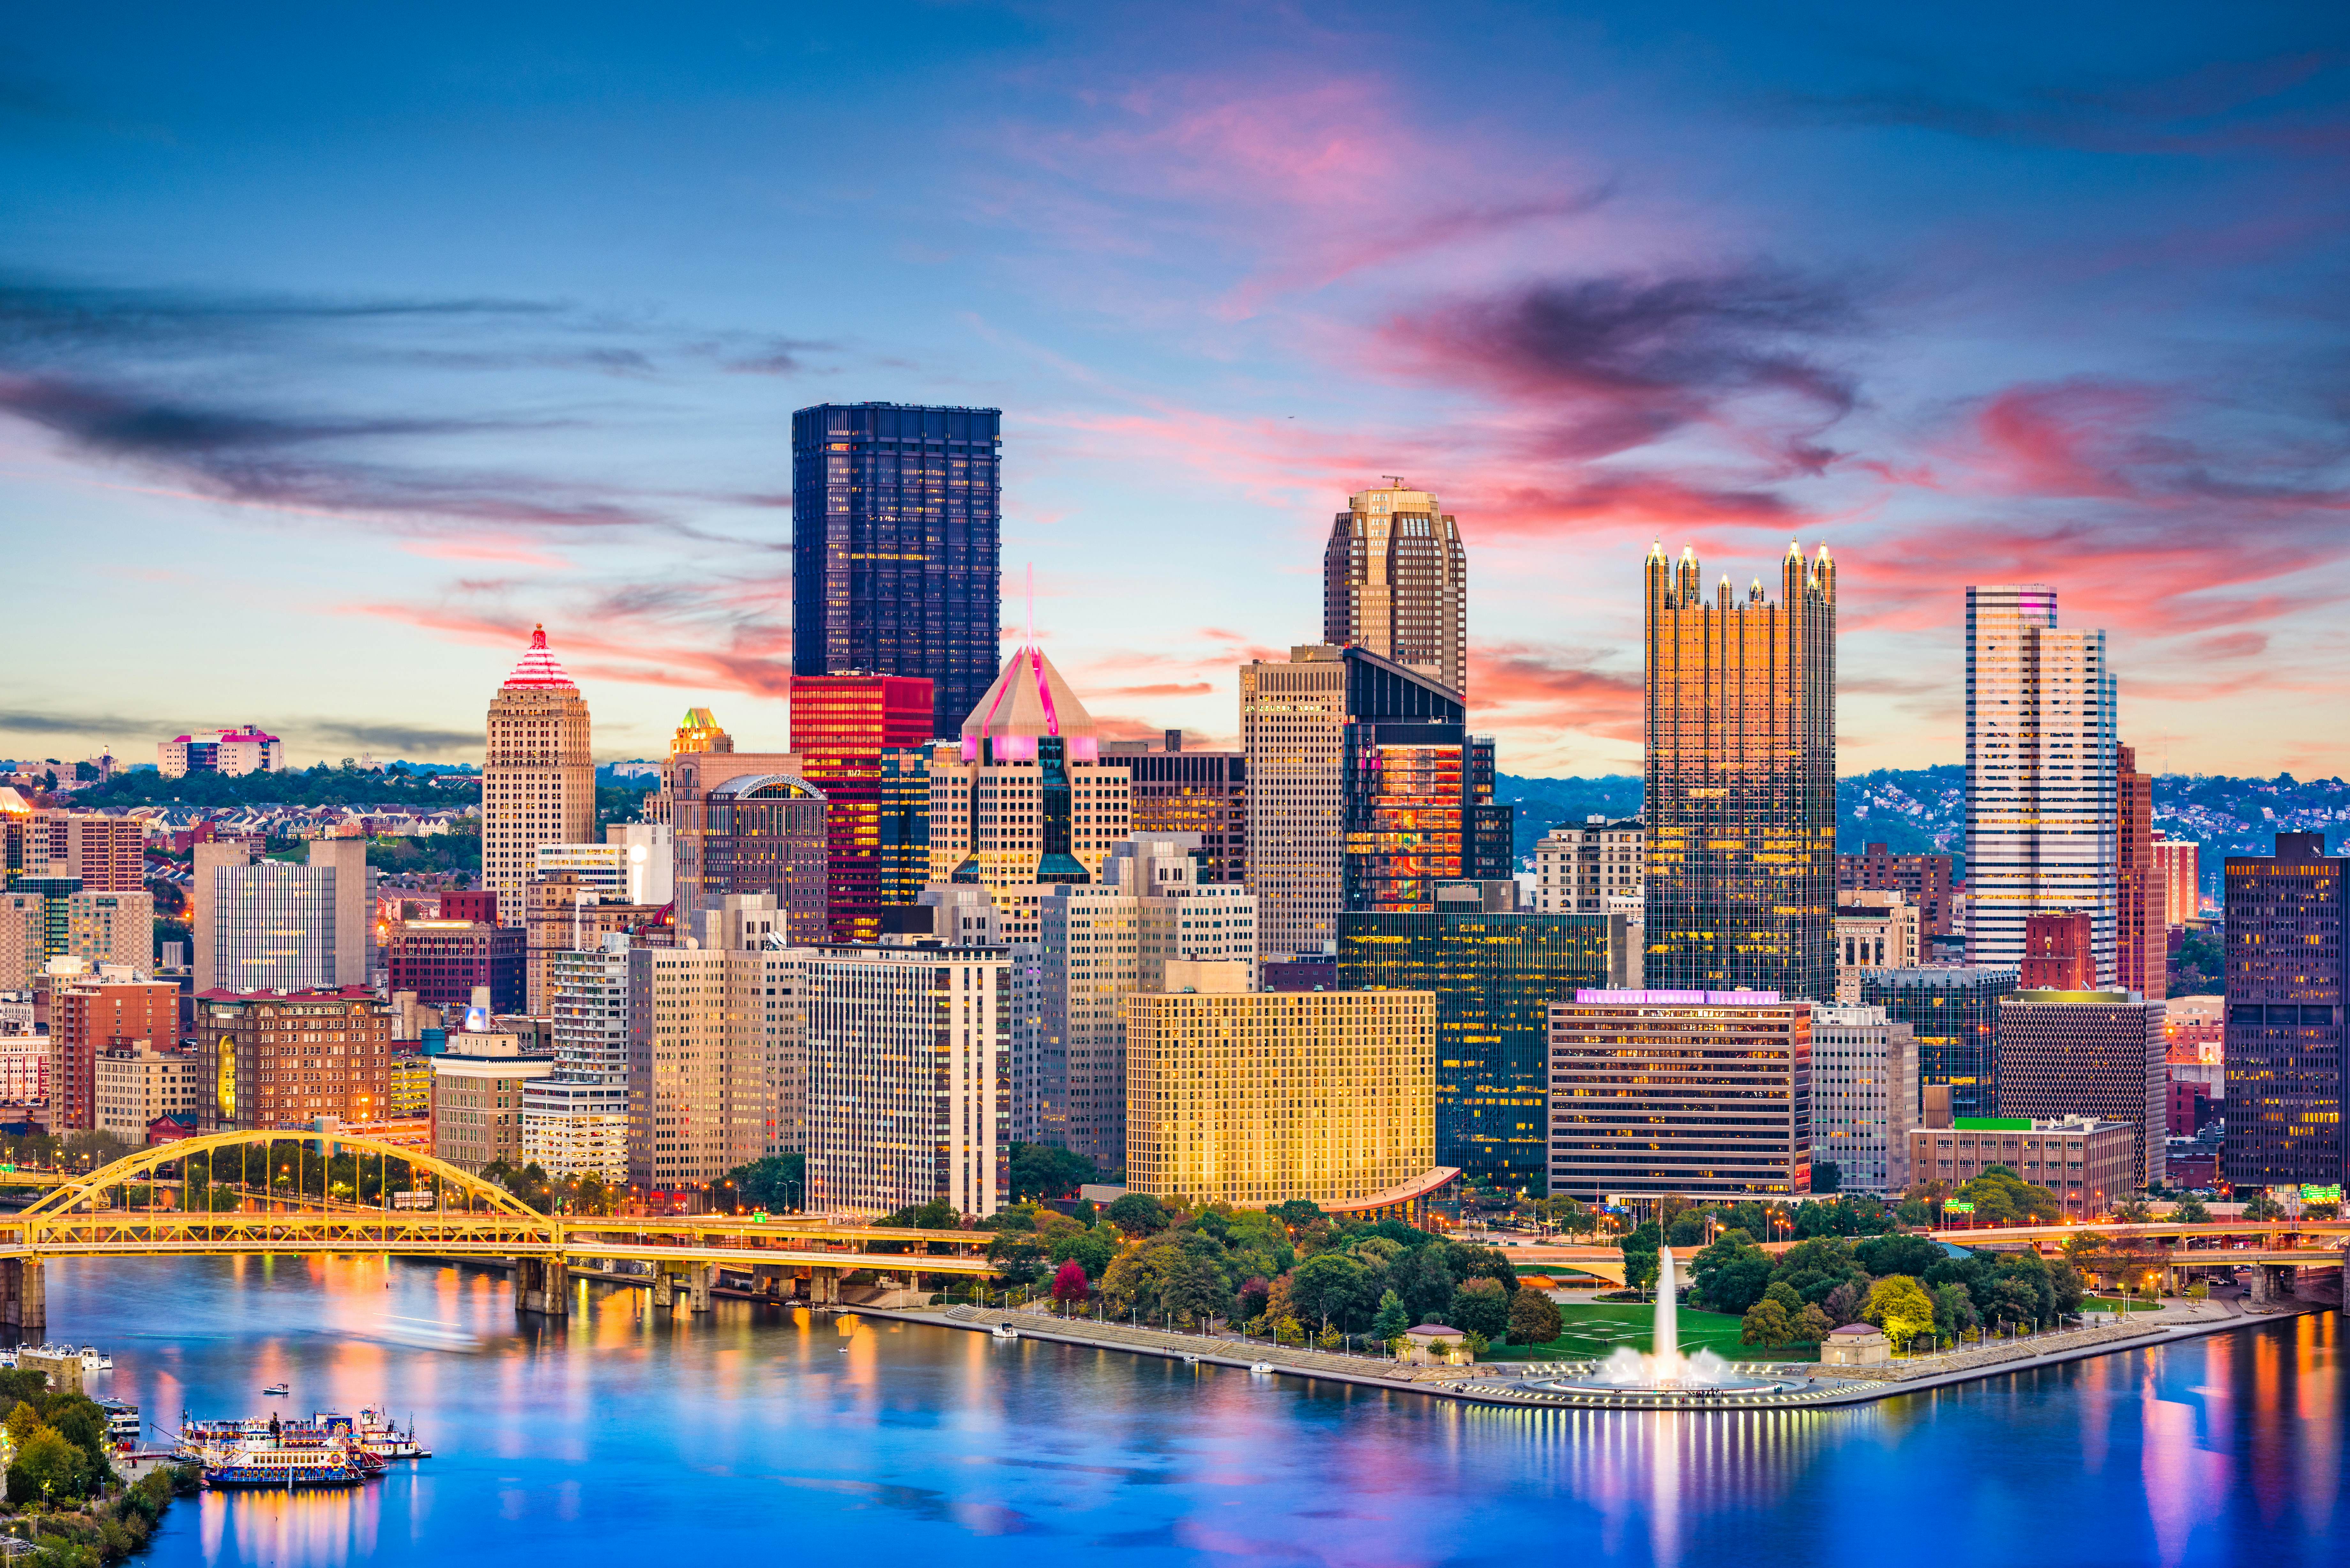 Must-See Pittsburgh Views, Pittsburgh, Pennsylvania Tourism